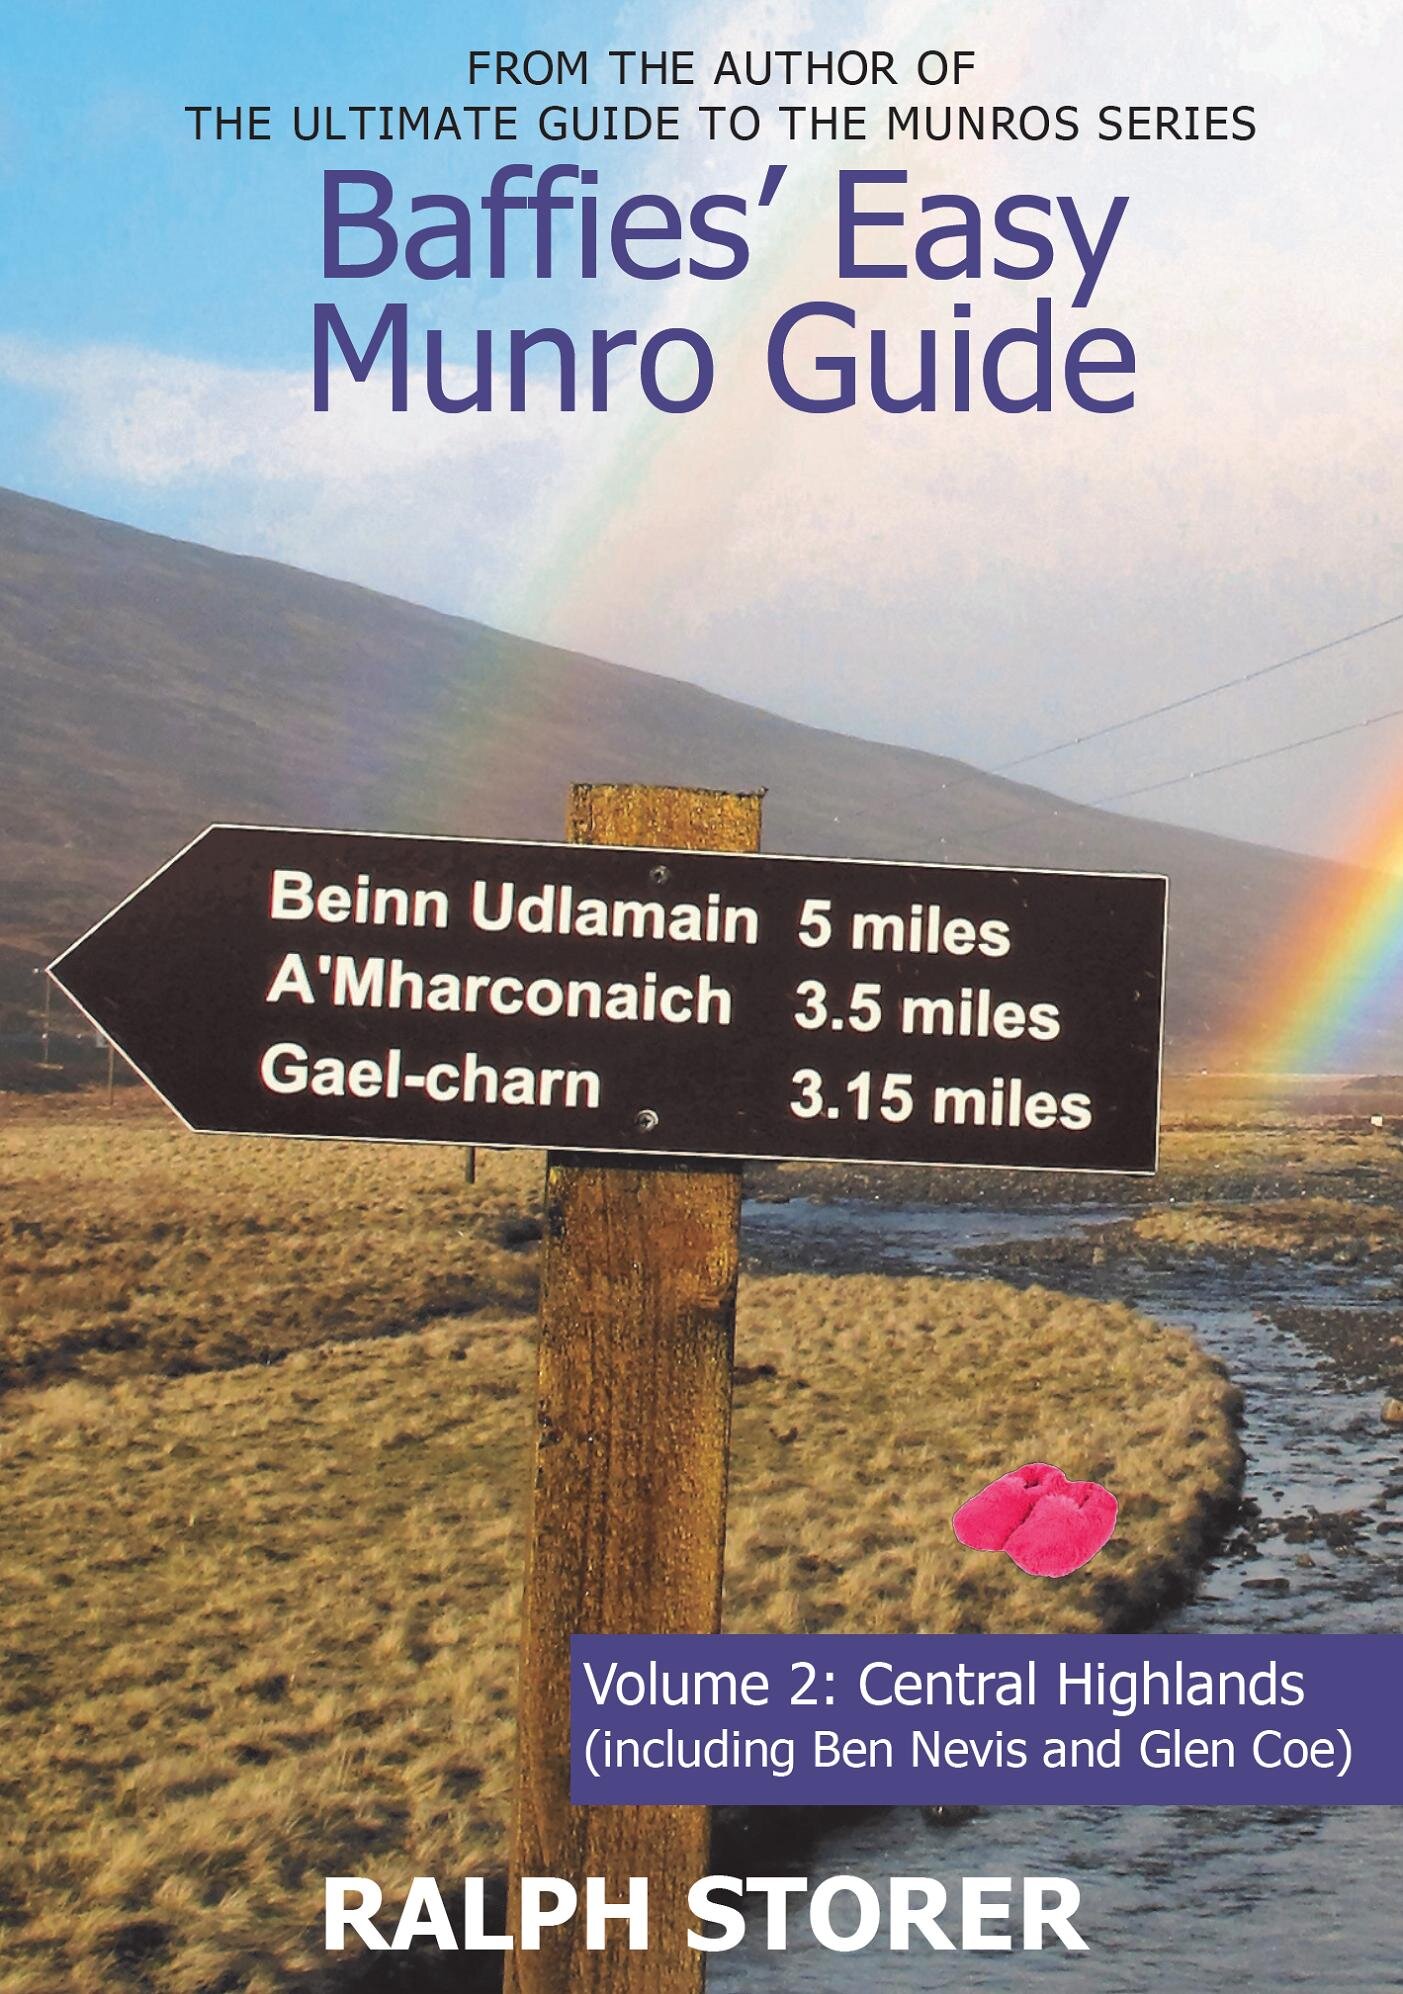 Baffies' Easy Munro Guide Volume 2 Central Highlands Luath Press.jpg